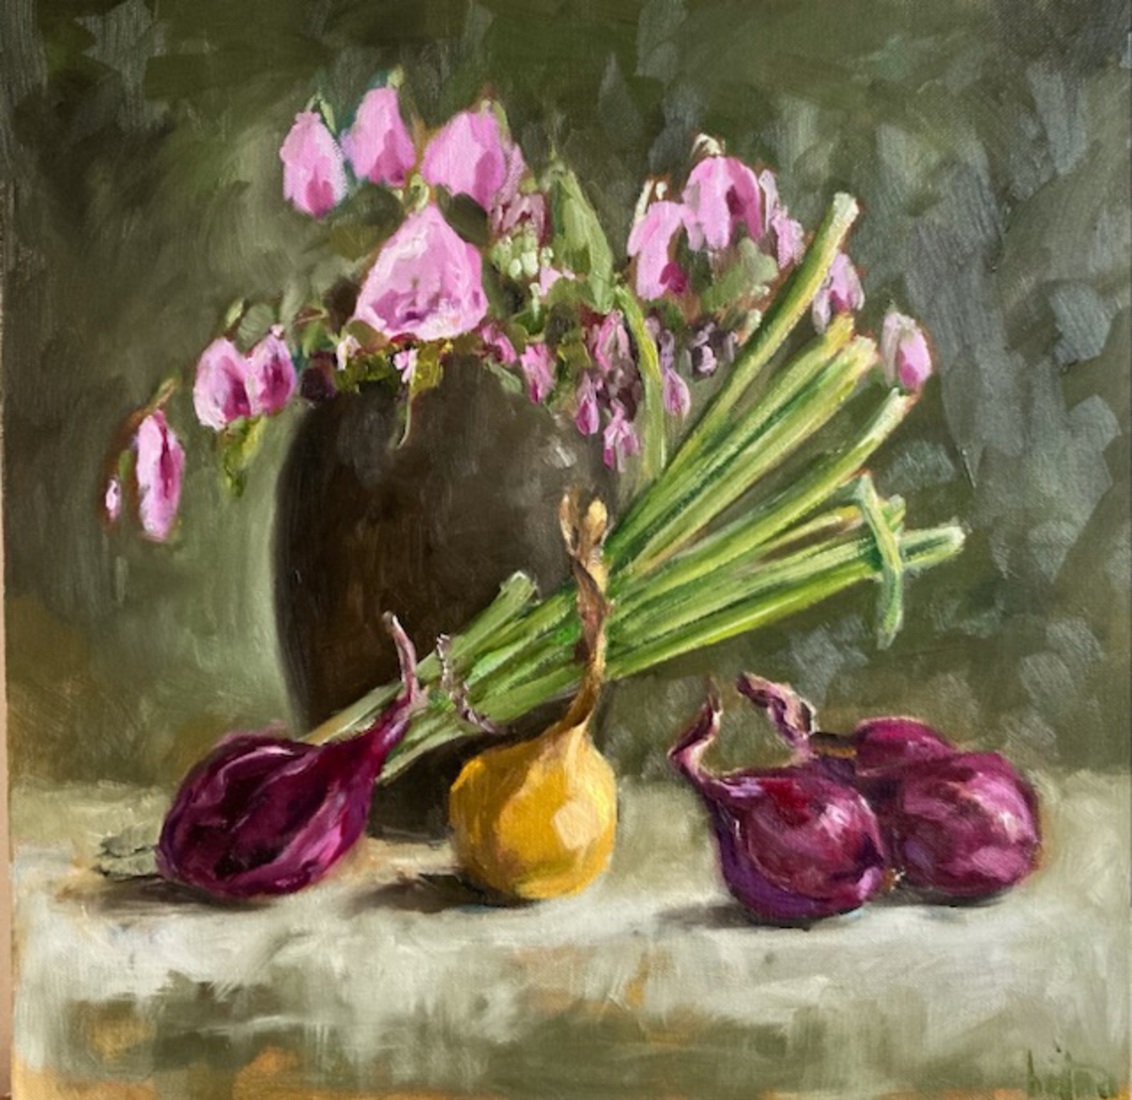 Onion and flowers